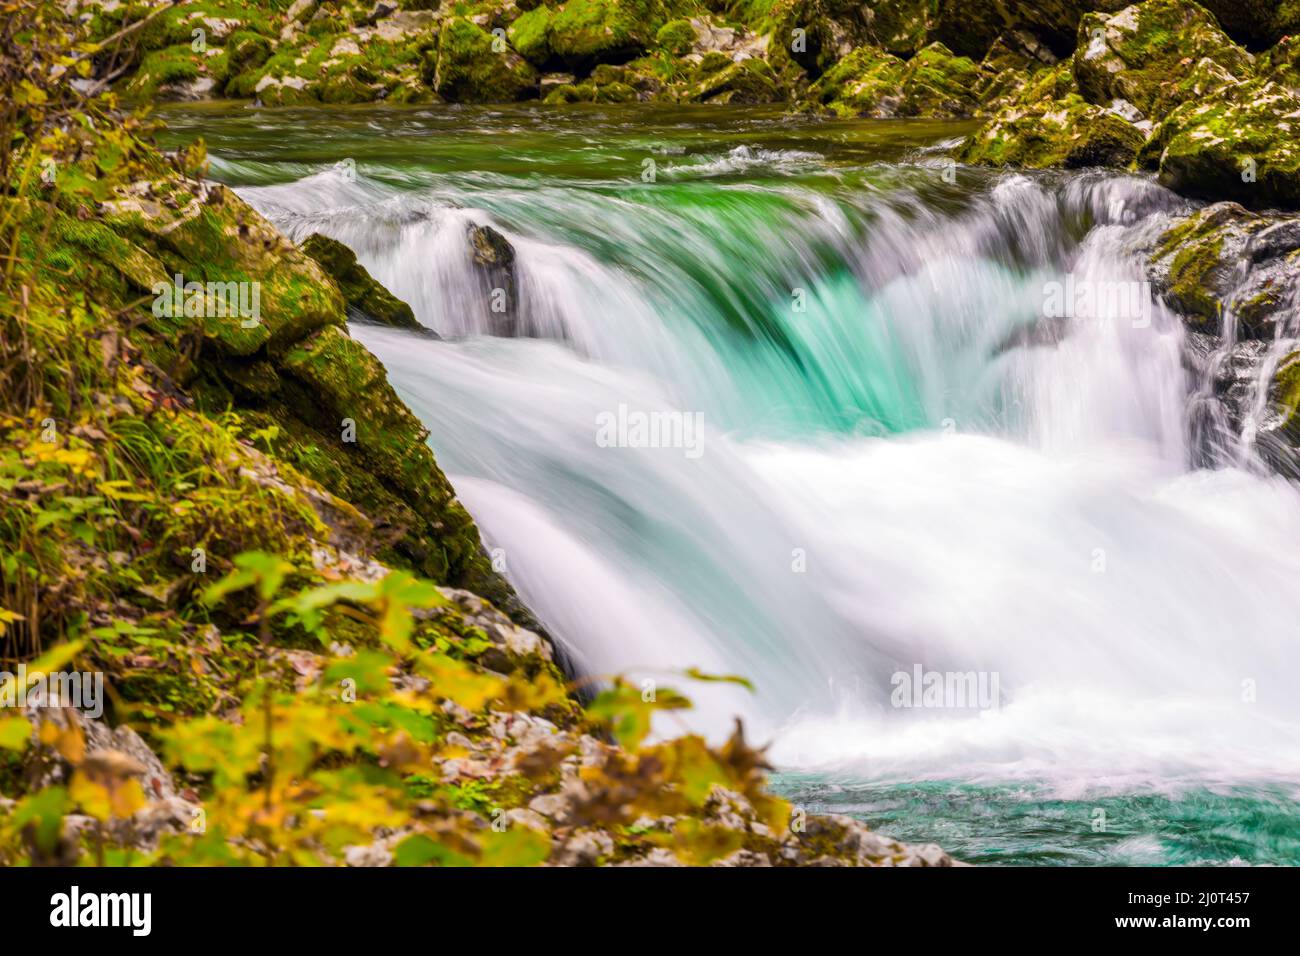 Picturesque bubbling waterfalls Stock Photo